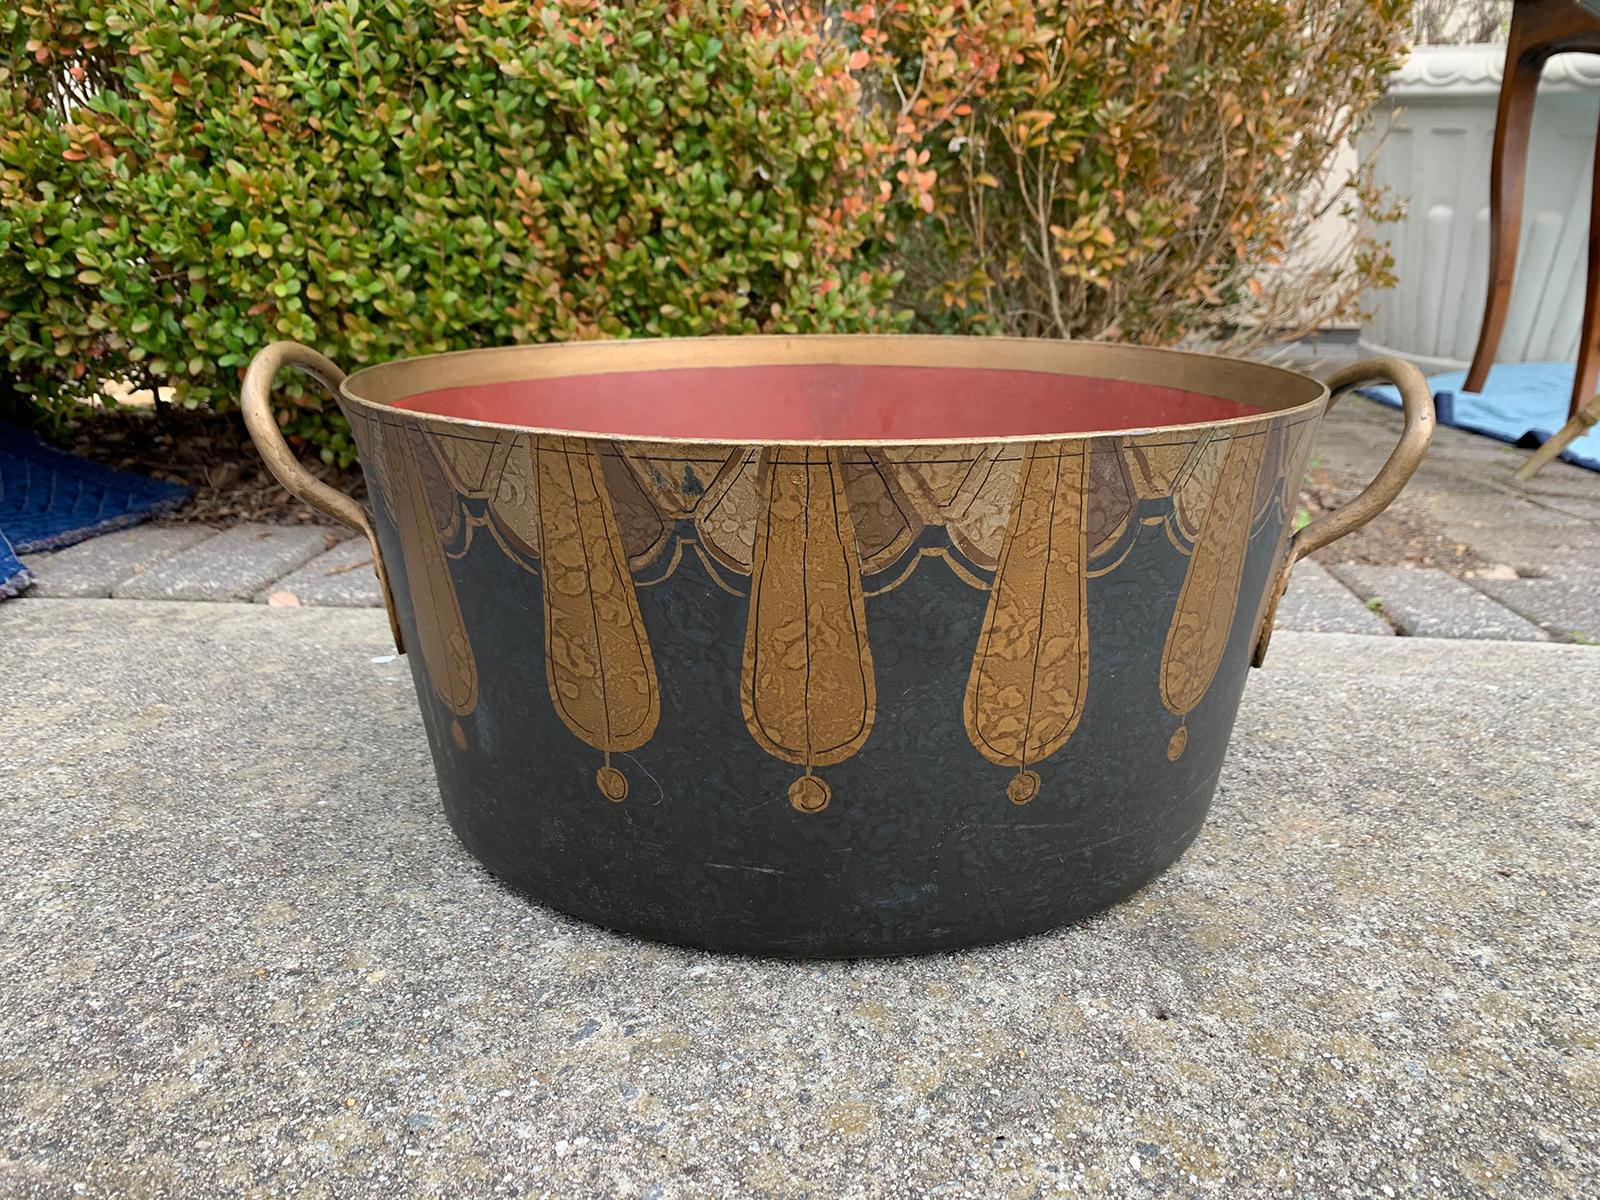 20th century tole gilt decorated container with handles, signed EDE.